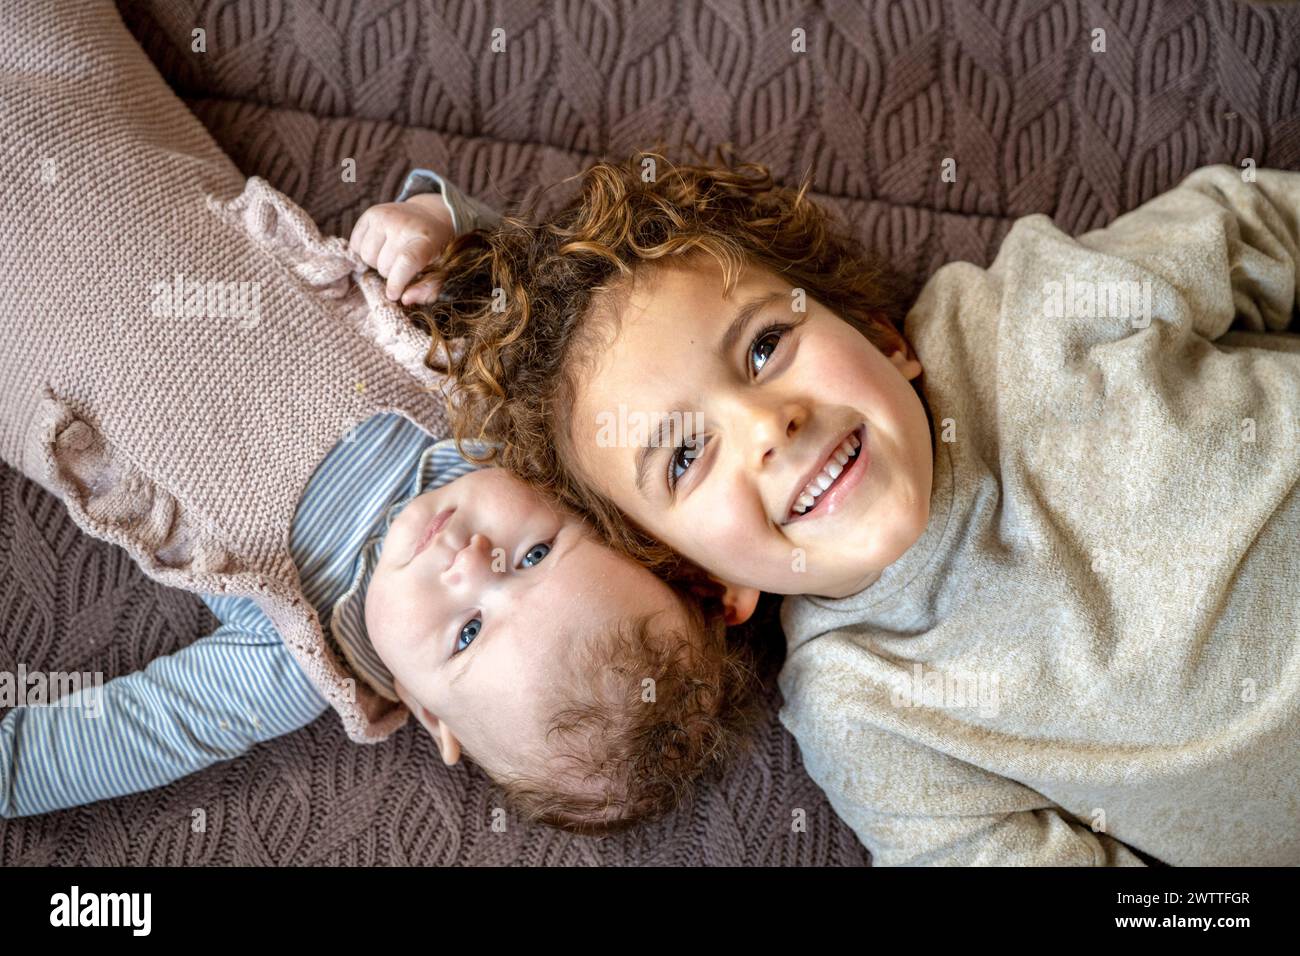 Two siblings sharing a playful moment on a cozy quilt. Stock Photo